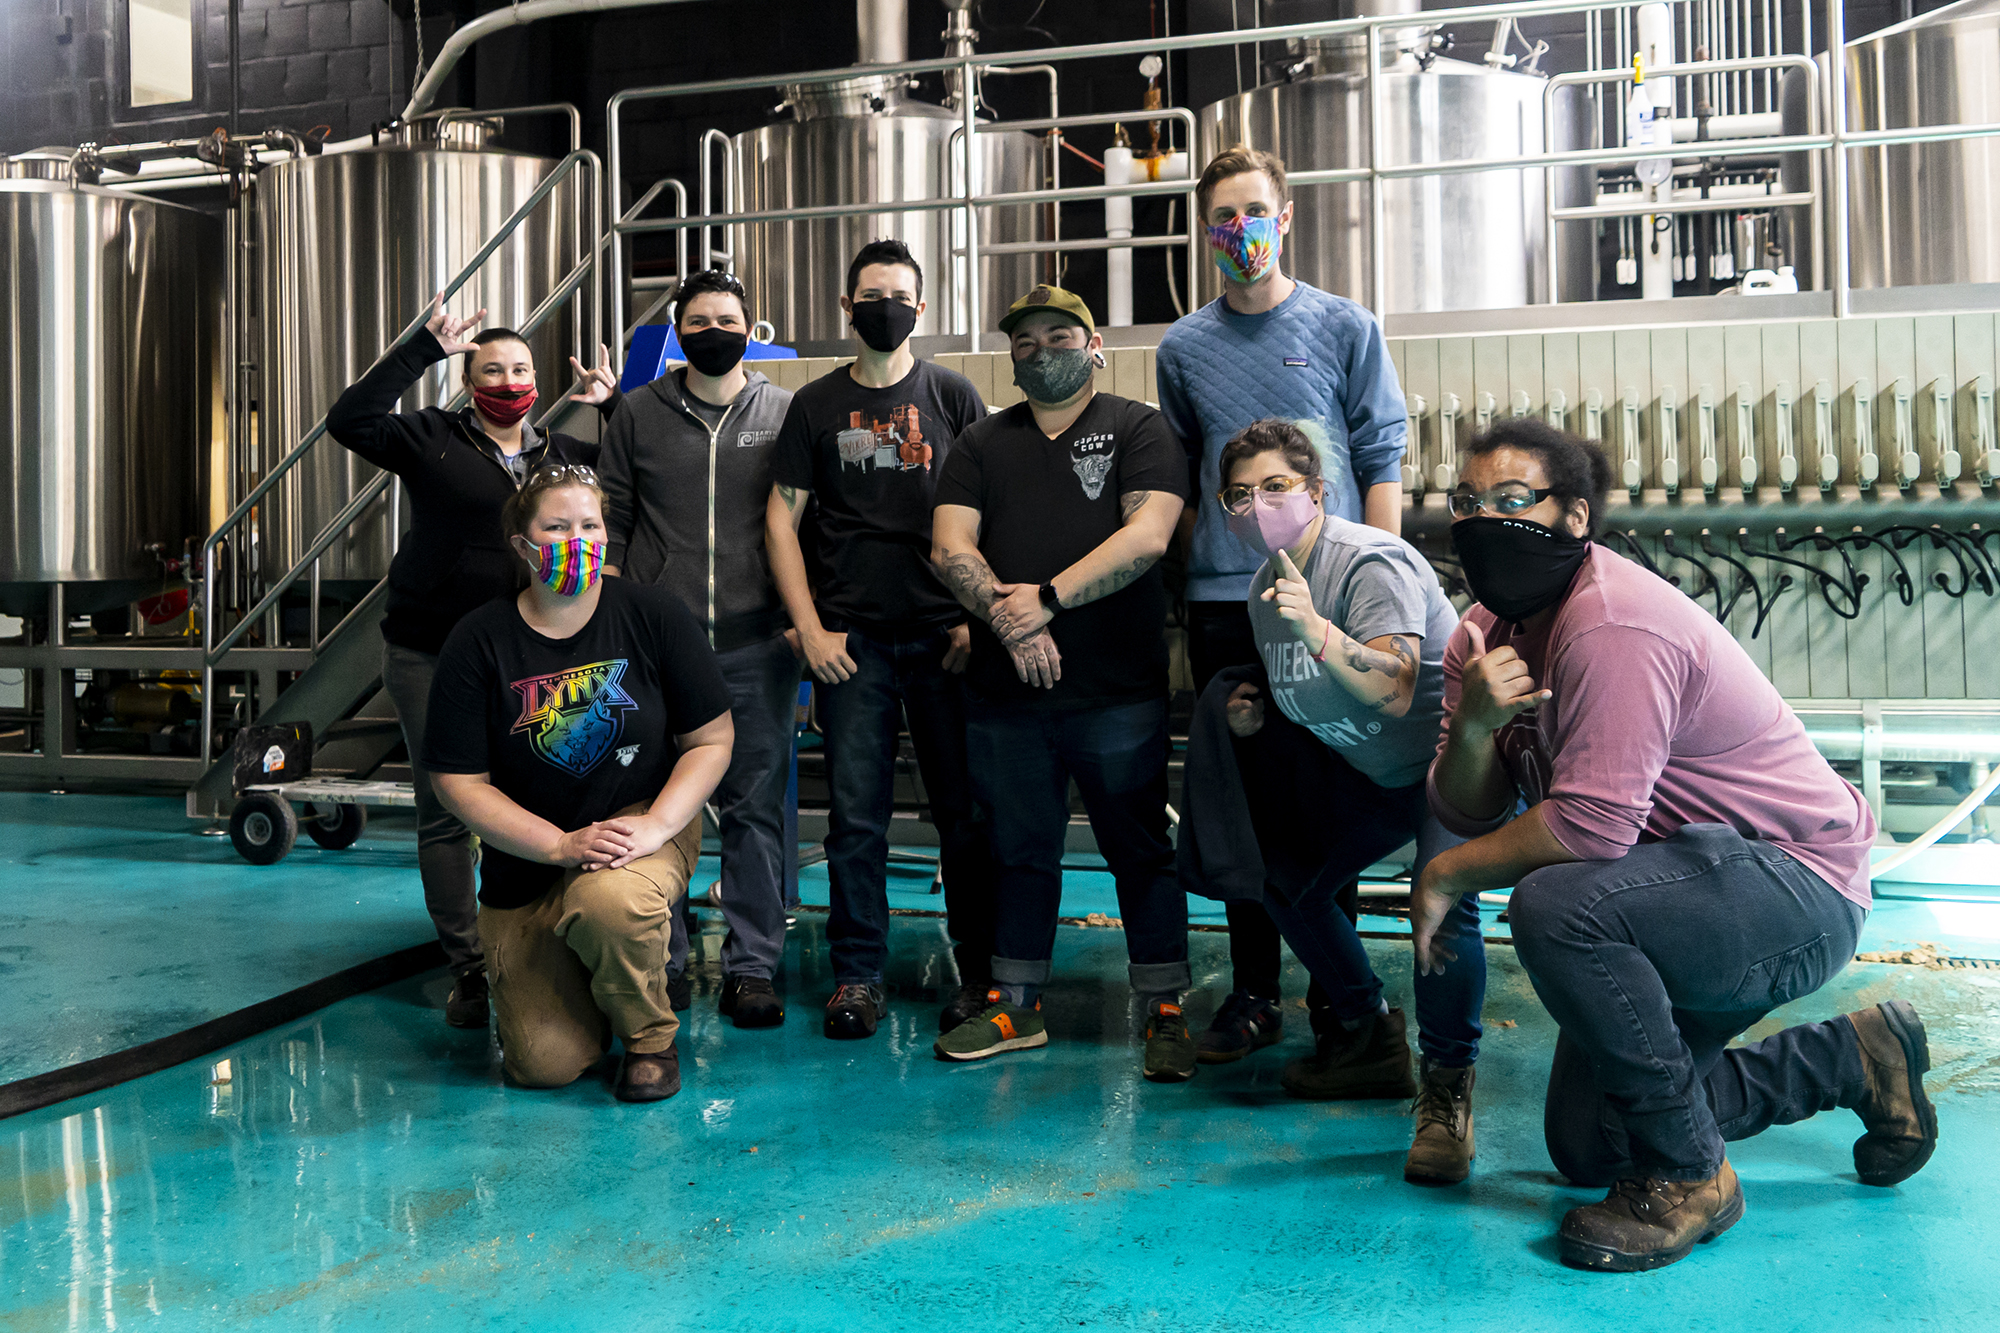 Tyler Mithuen (3rd from R) and Mai Jakubowski (2nd from R) pose with other members of Deviant Minds during a brew day at Modist Brewing Company • Photo via Deviant Minds